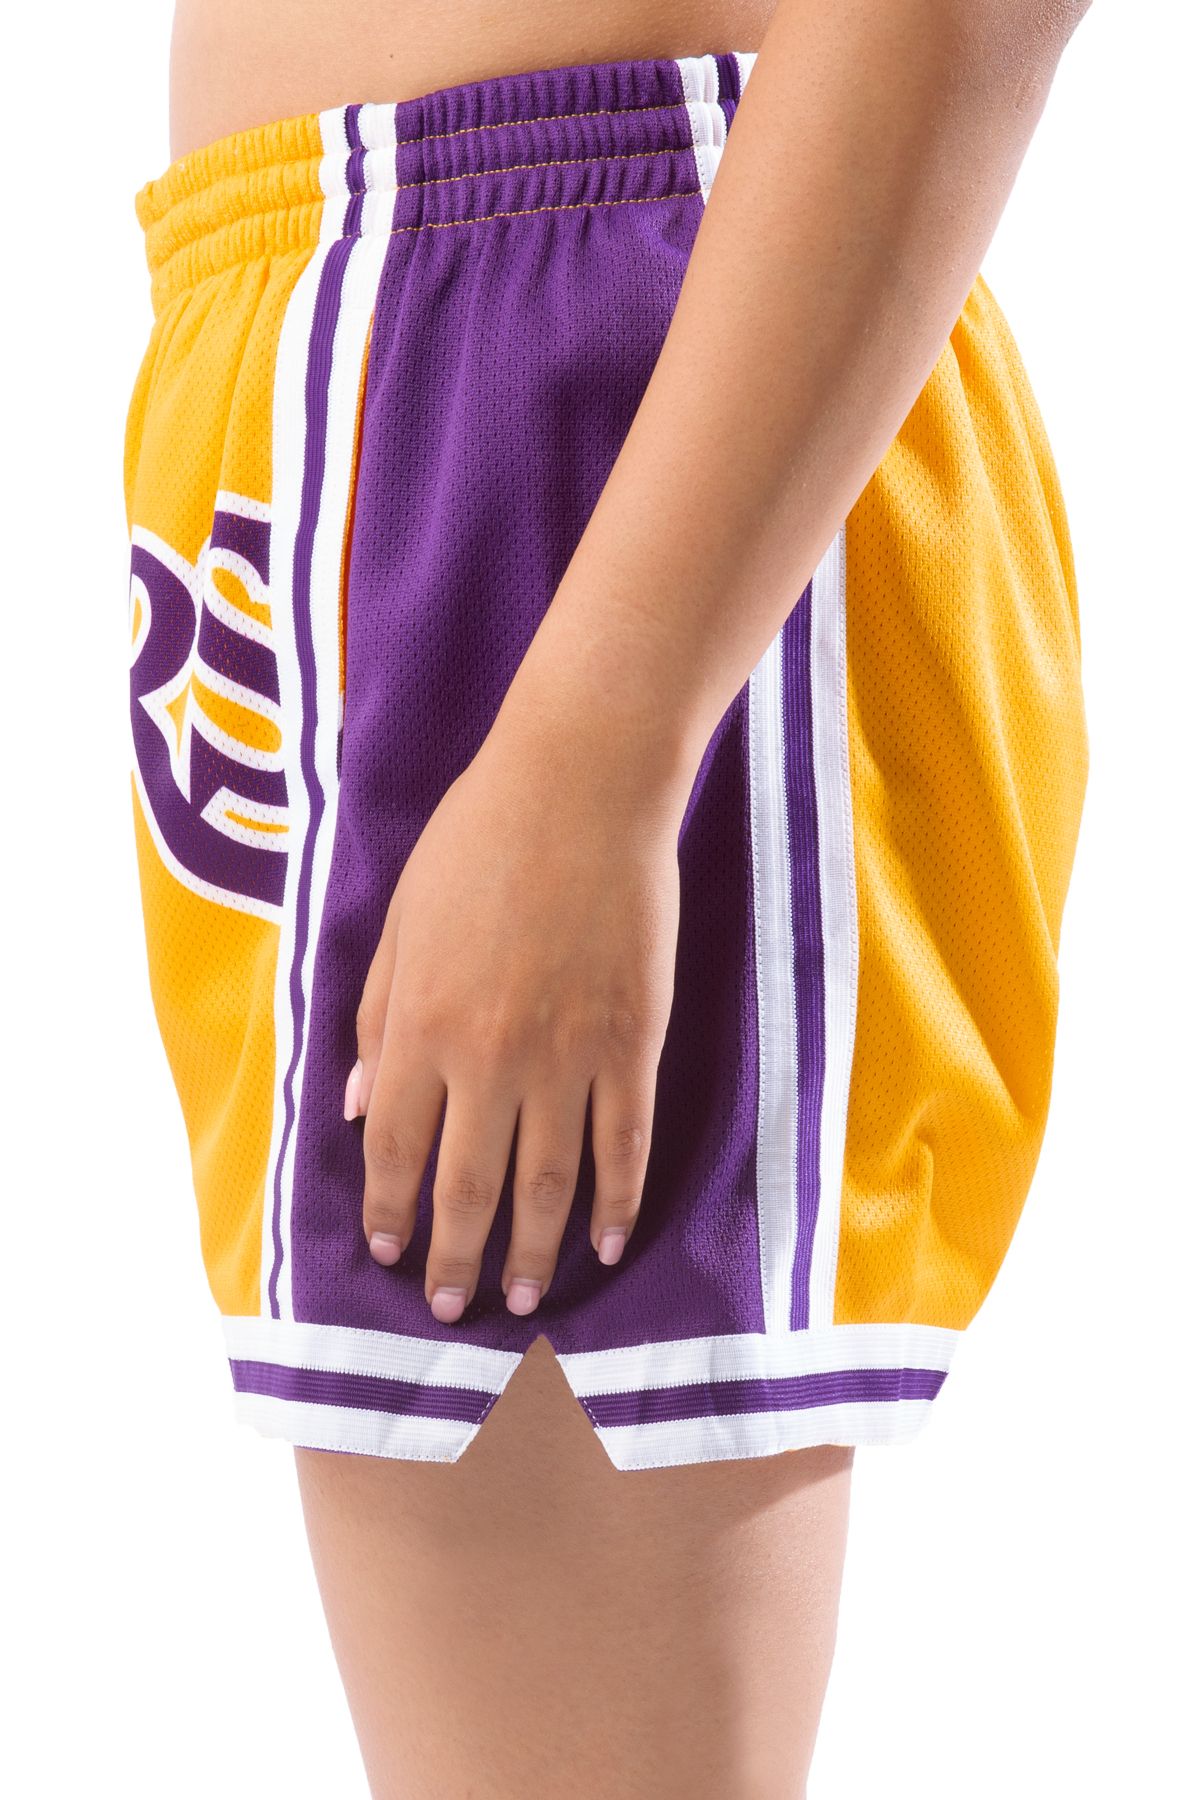 DS Women's Mitchell & Ness NBA Los Angeles Lakers Shorts XL